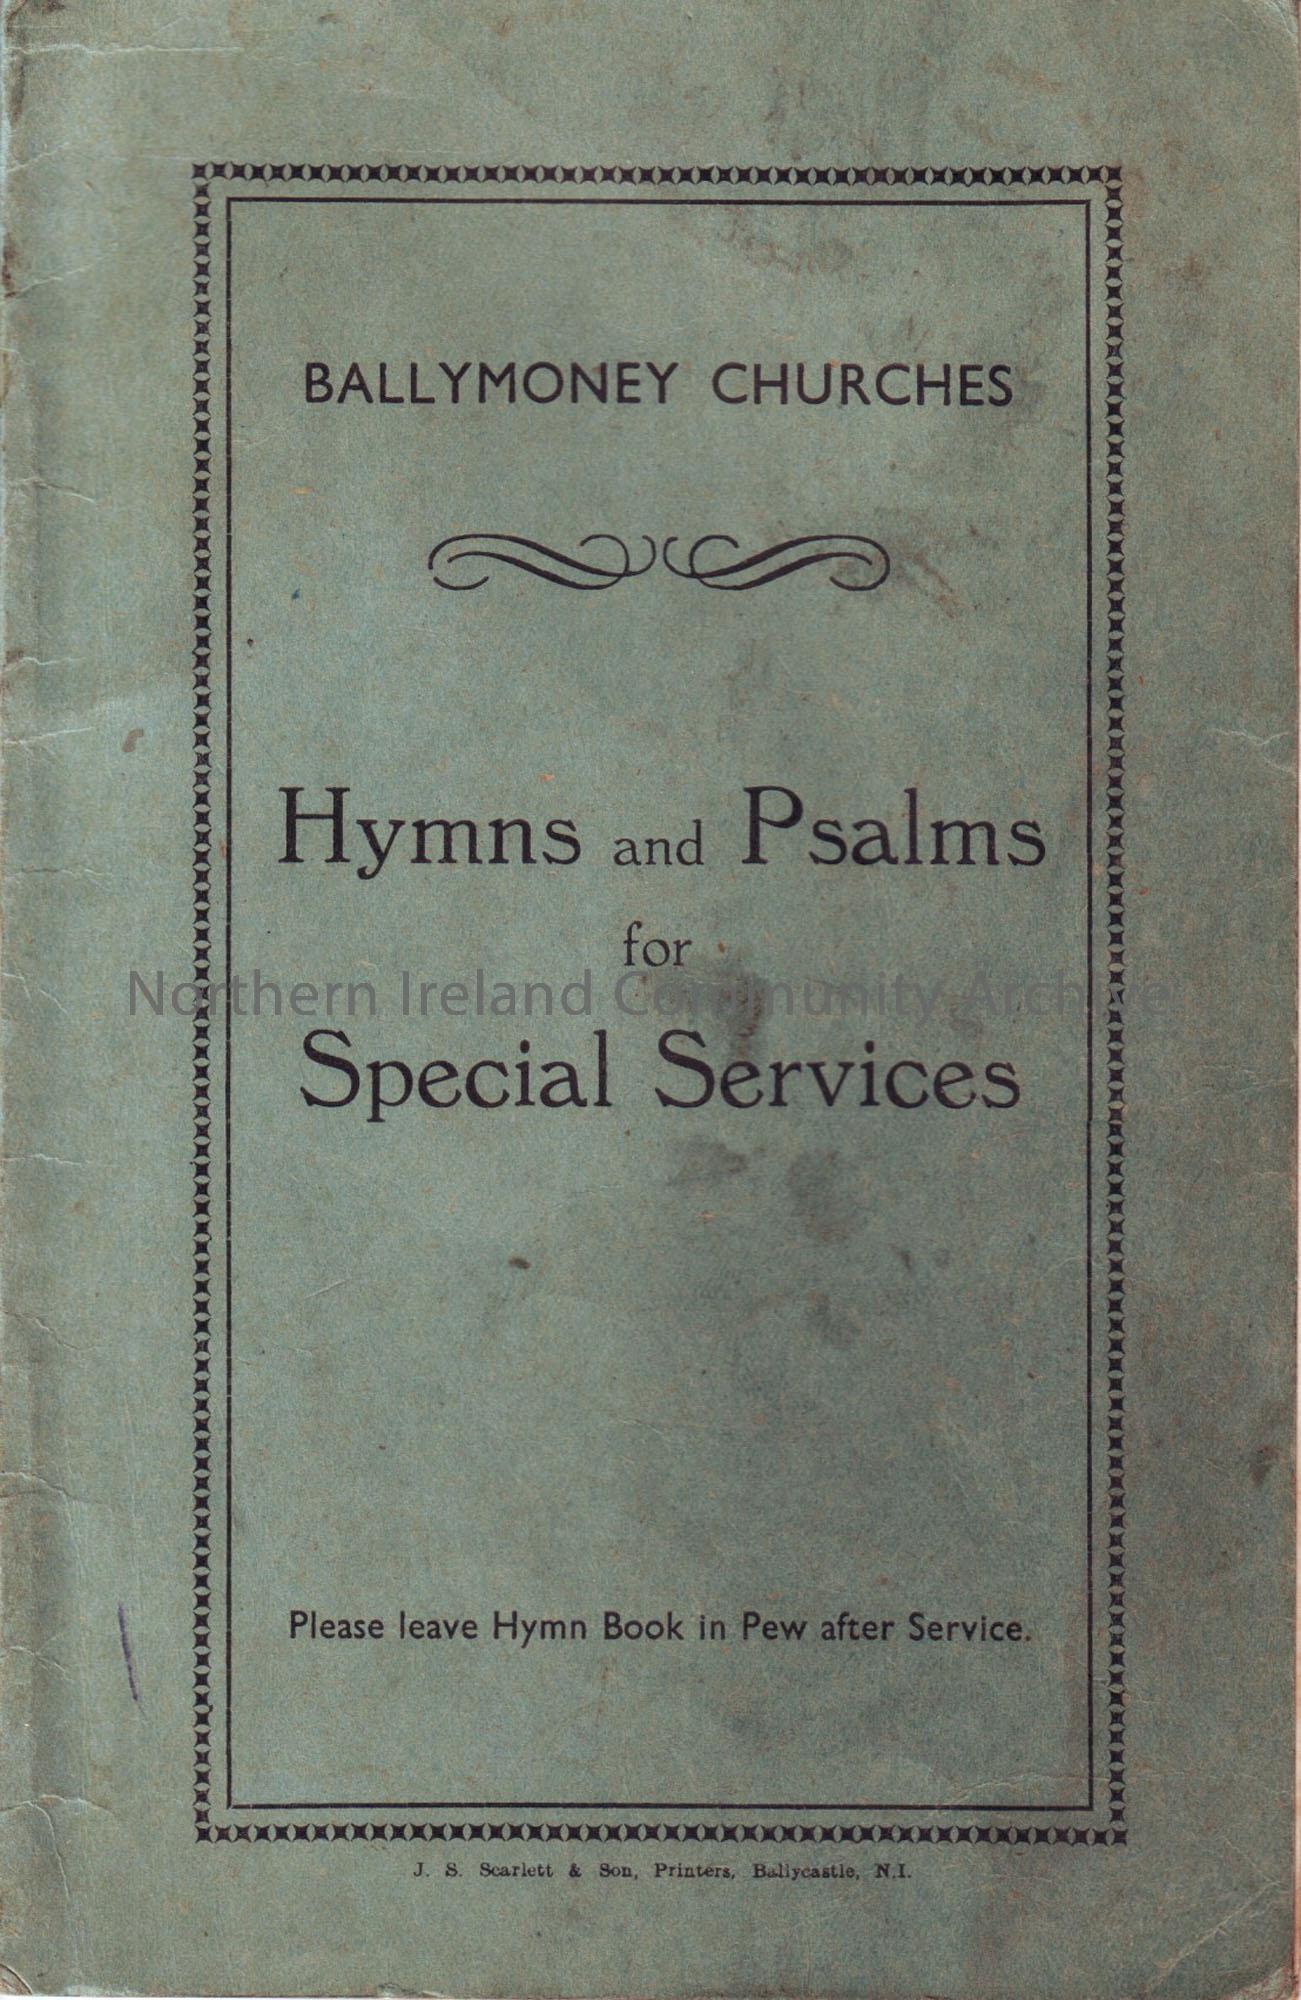 Ballymoney Churches Hymns and Psalms for special services